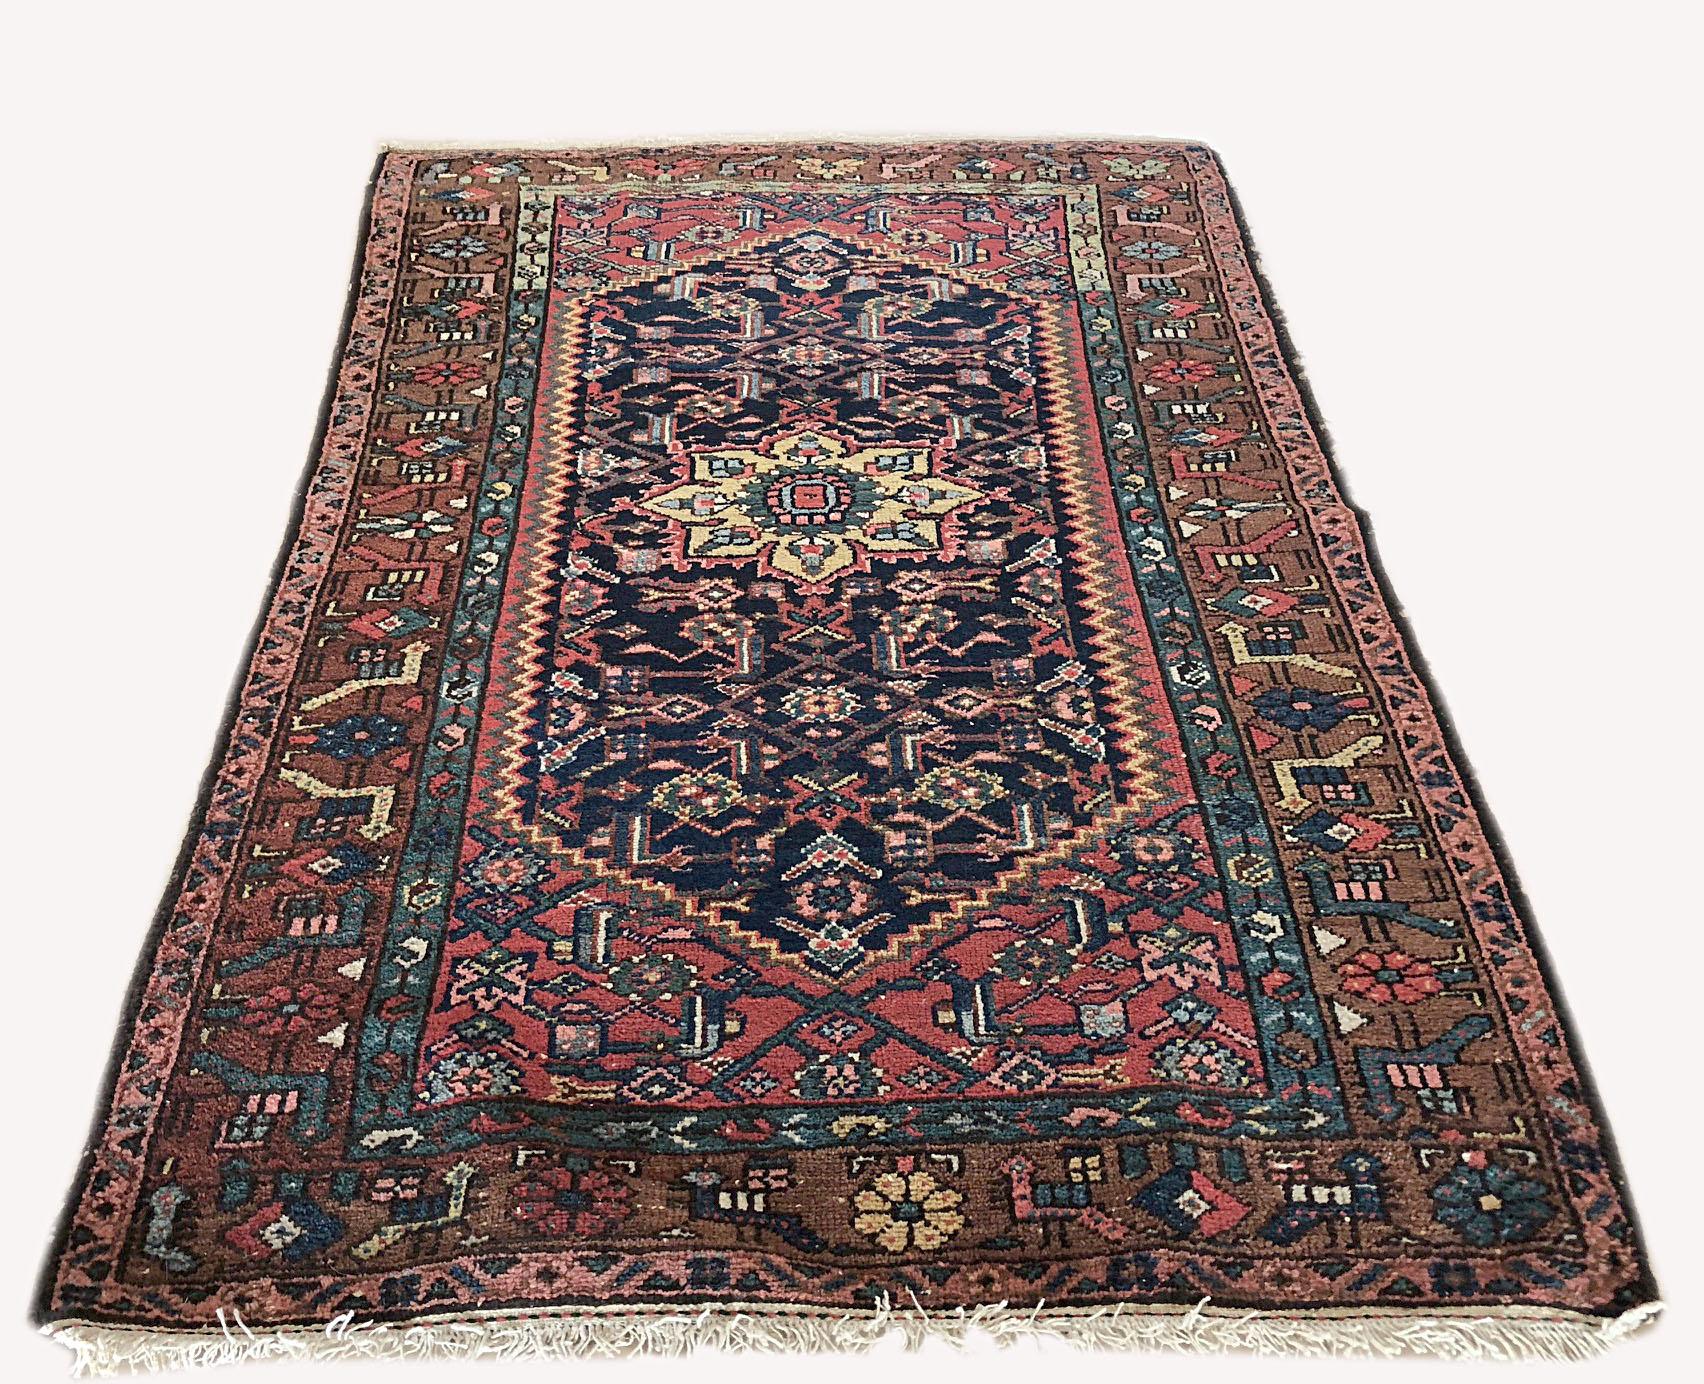 Hamadan is one of the oldest cities in Iran (Persia) that produces fine hand knotted rugs. The colors in this piece are dominated by different nuances of indigo blue, mauve, ivory and brown. The age of this rug goes back to 1930s which makes it a